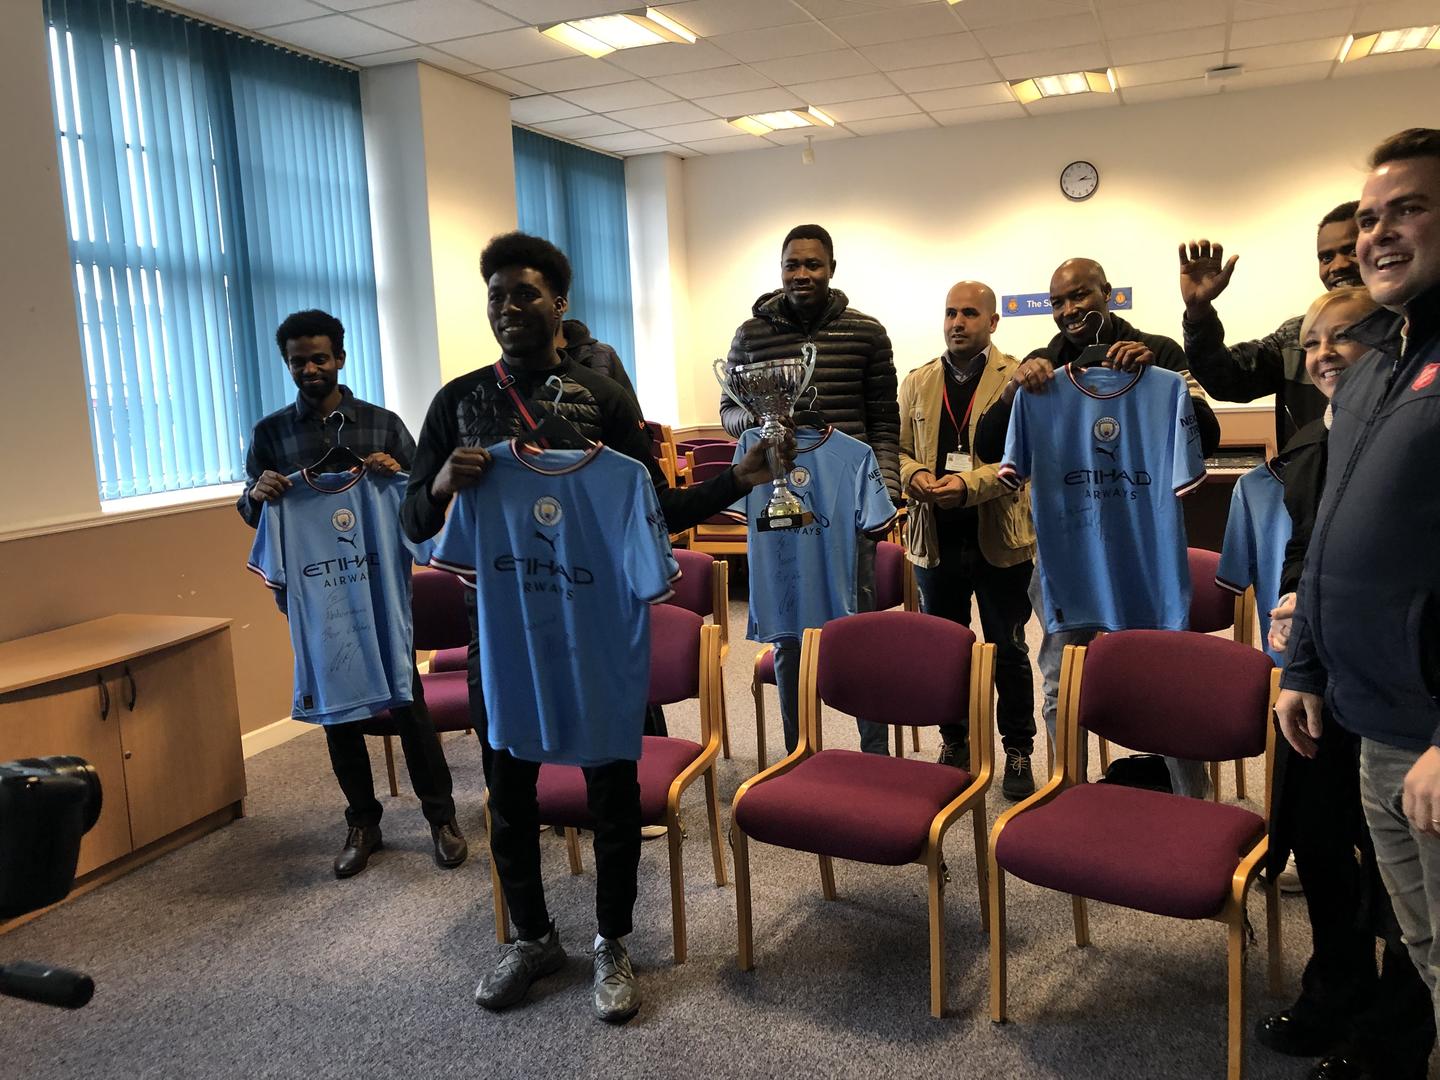 Winners received signed Manchester City shirts